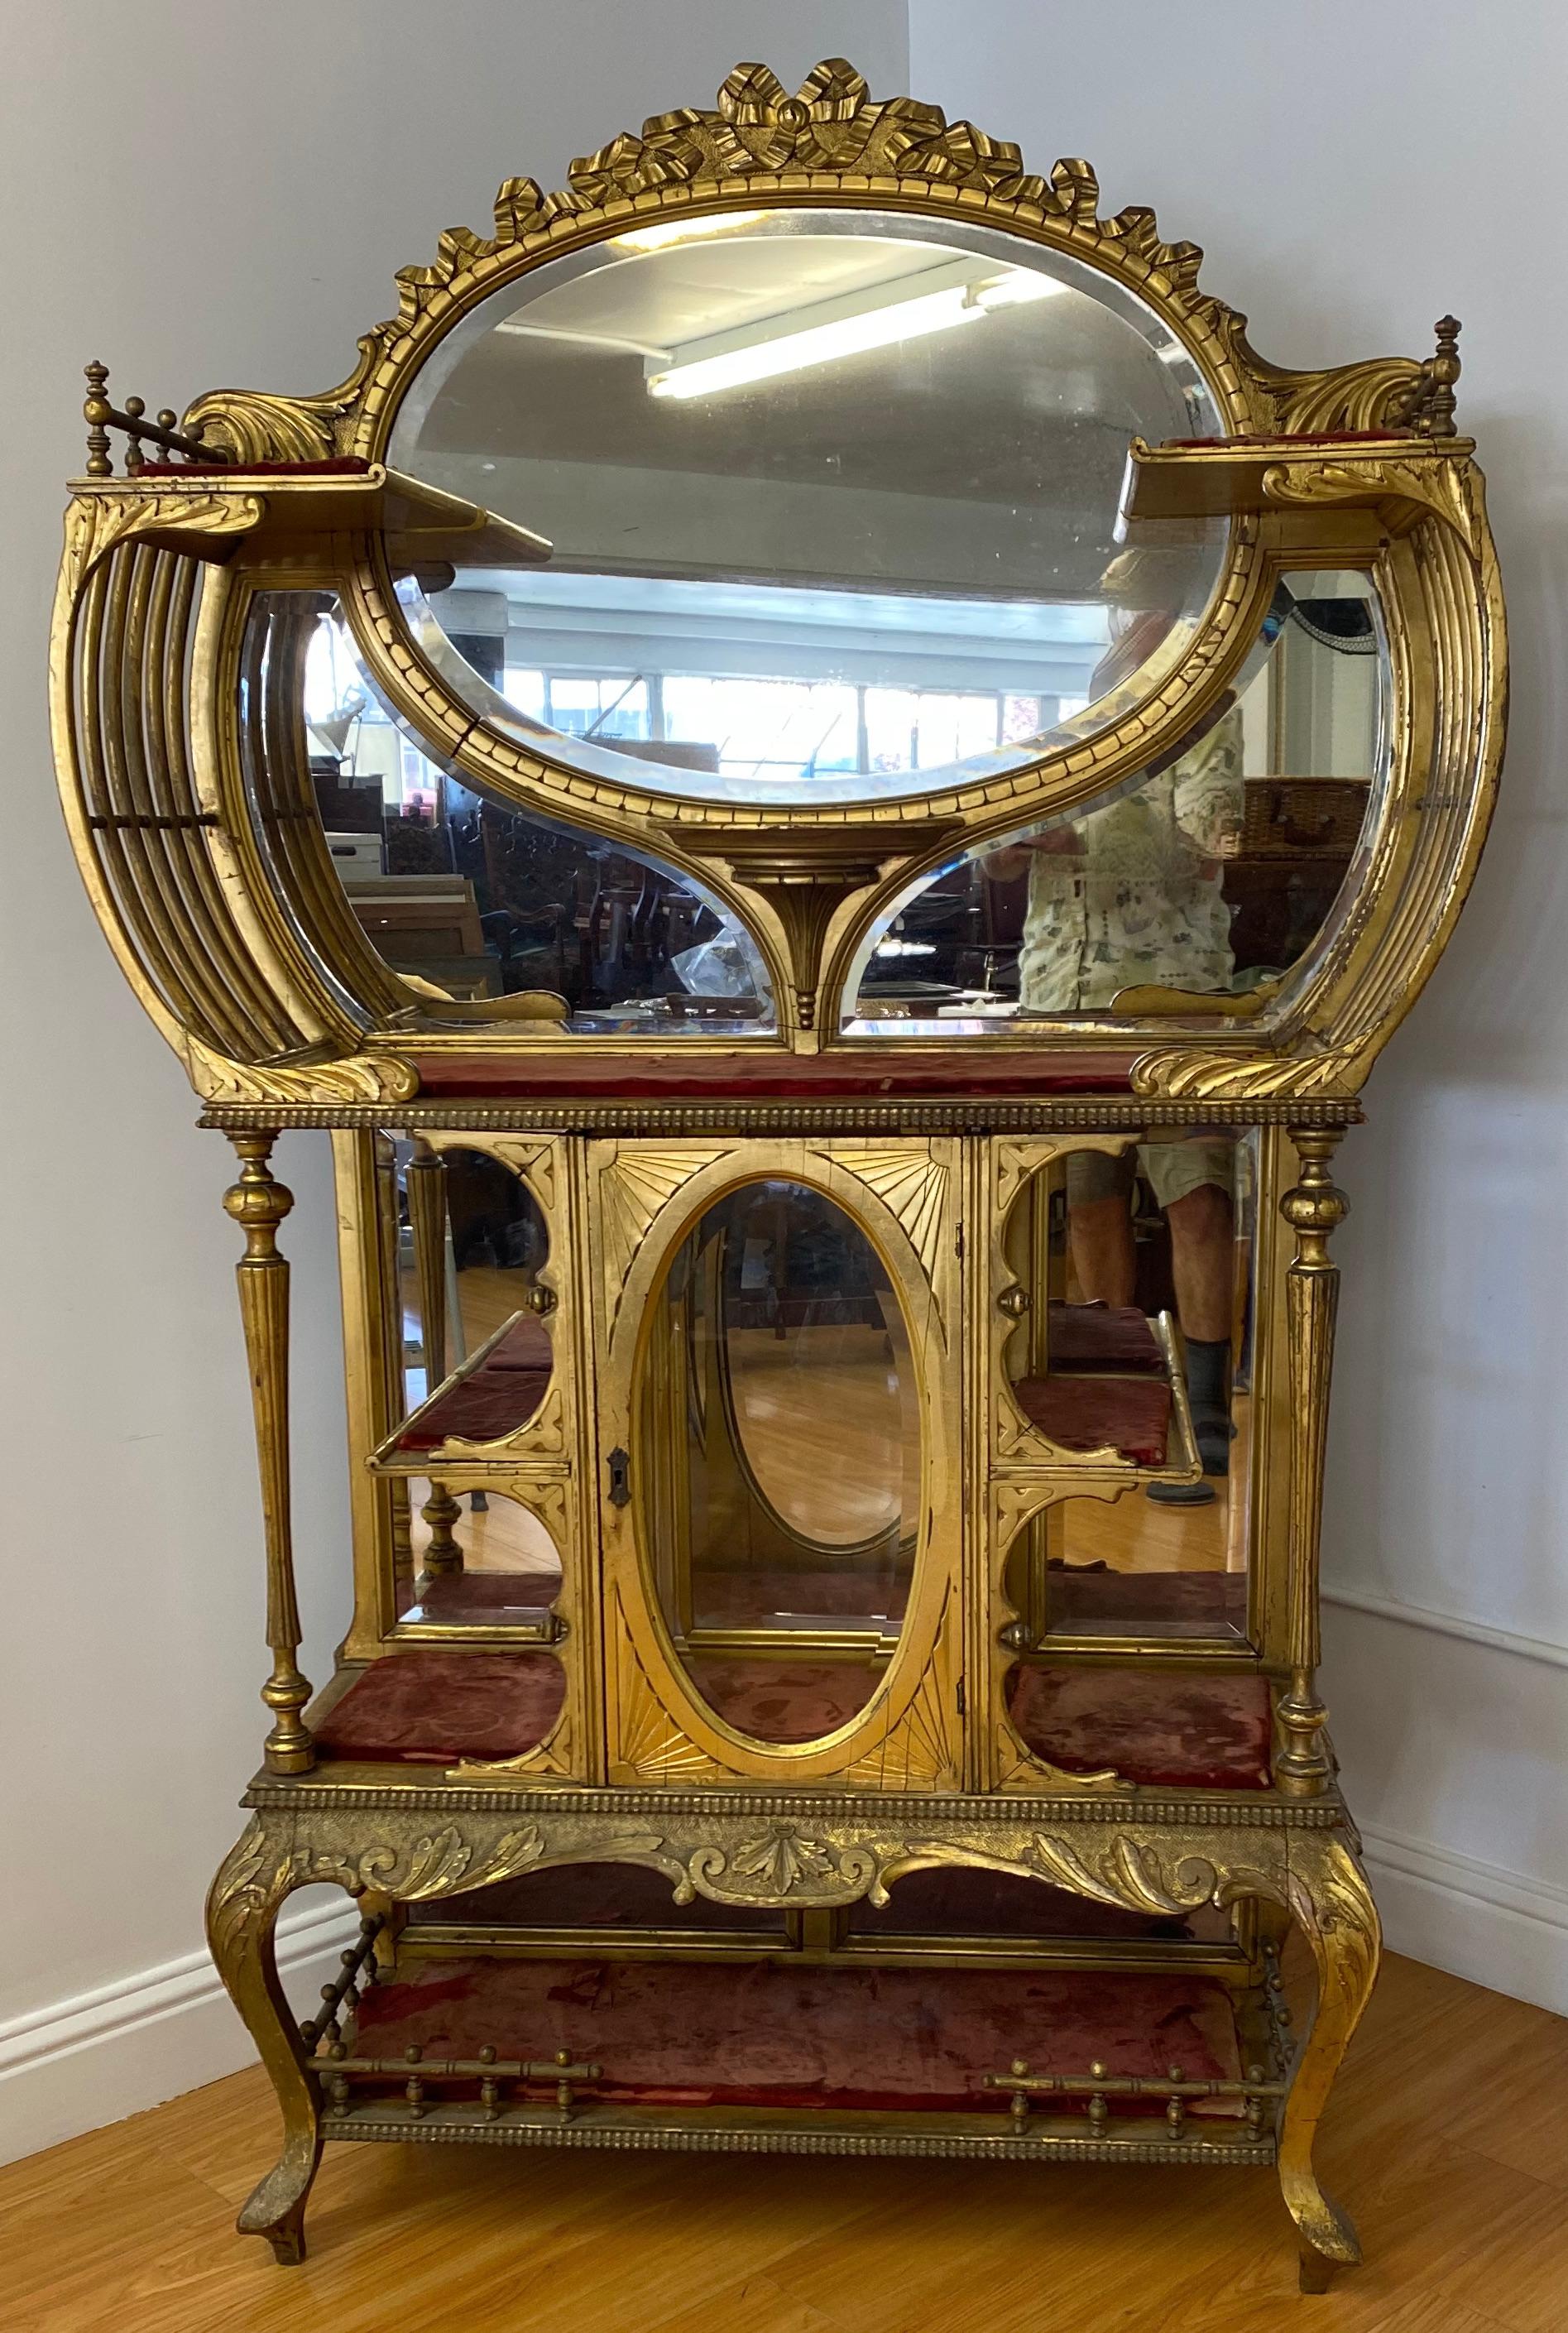 Art Nouveau hand carved & gilded etegere, Circa 1890-1910

Gorgeous late 19th to early 20th century carved and gilded etagere

Ample remains of the original gilding remain

The shelves have removable inserts that you can cover with fabric. The